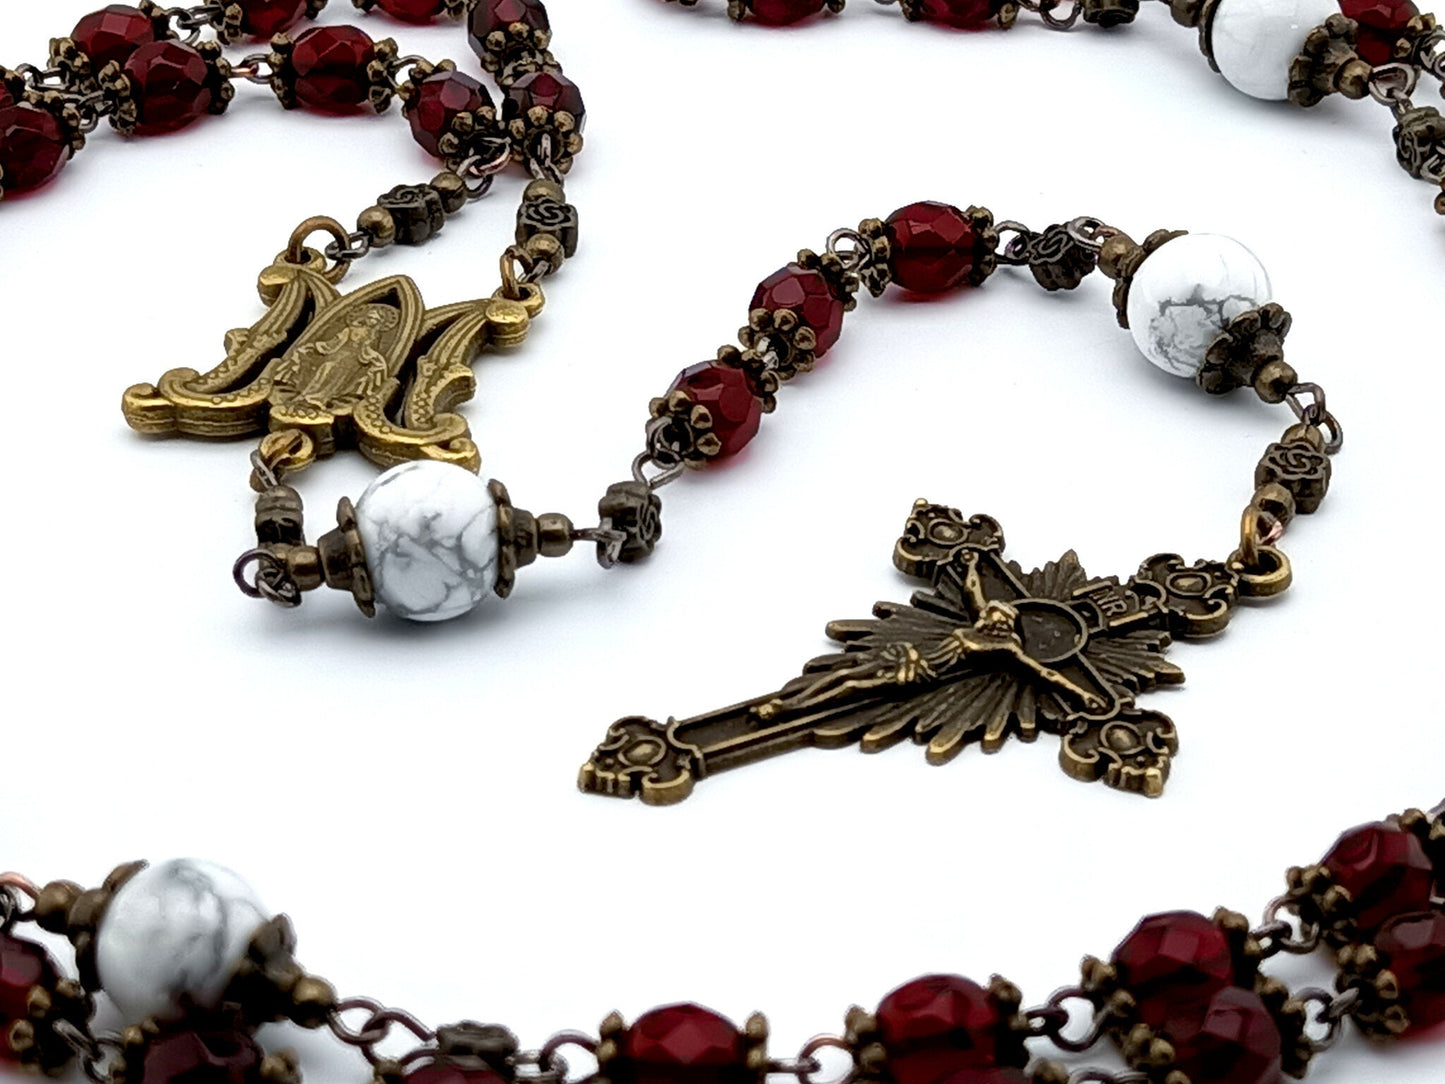 Miraculous medal unique rosary beads with red faceted glass beads, bronze sunburst crucifix, metal centre medal and white howlite pater beads.